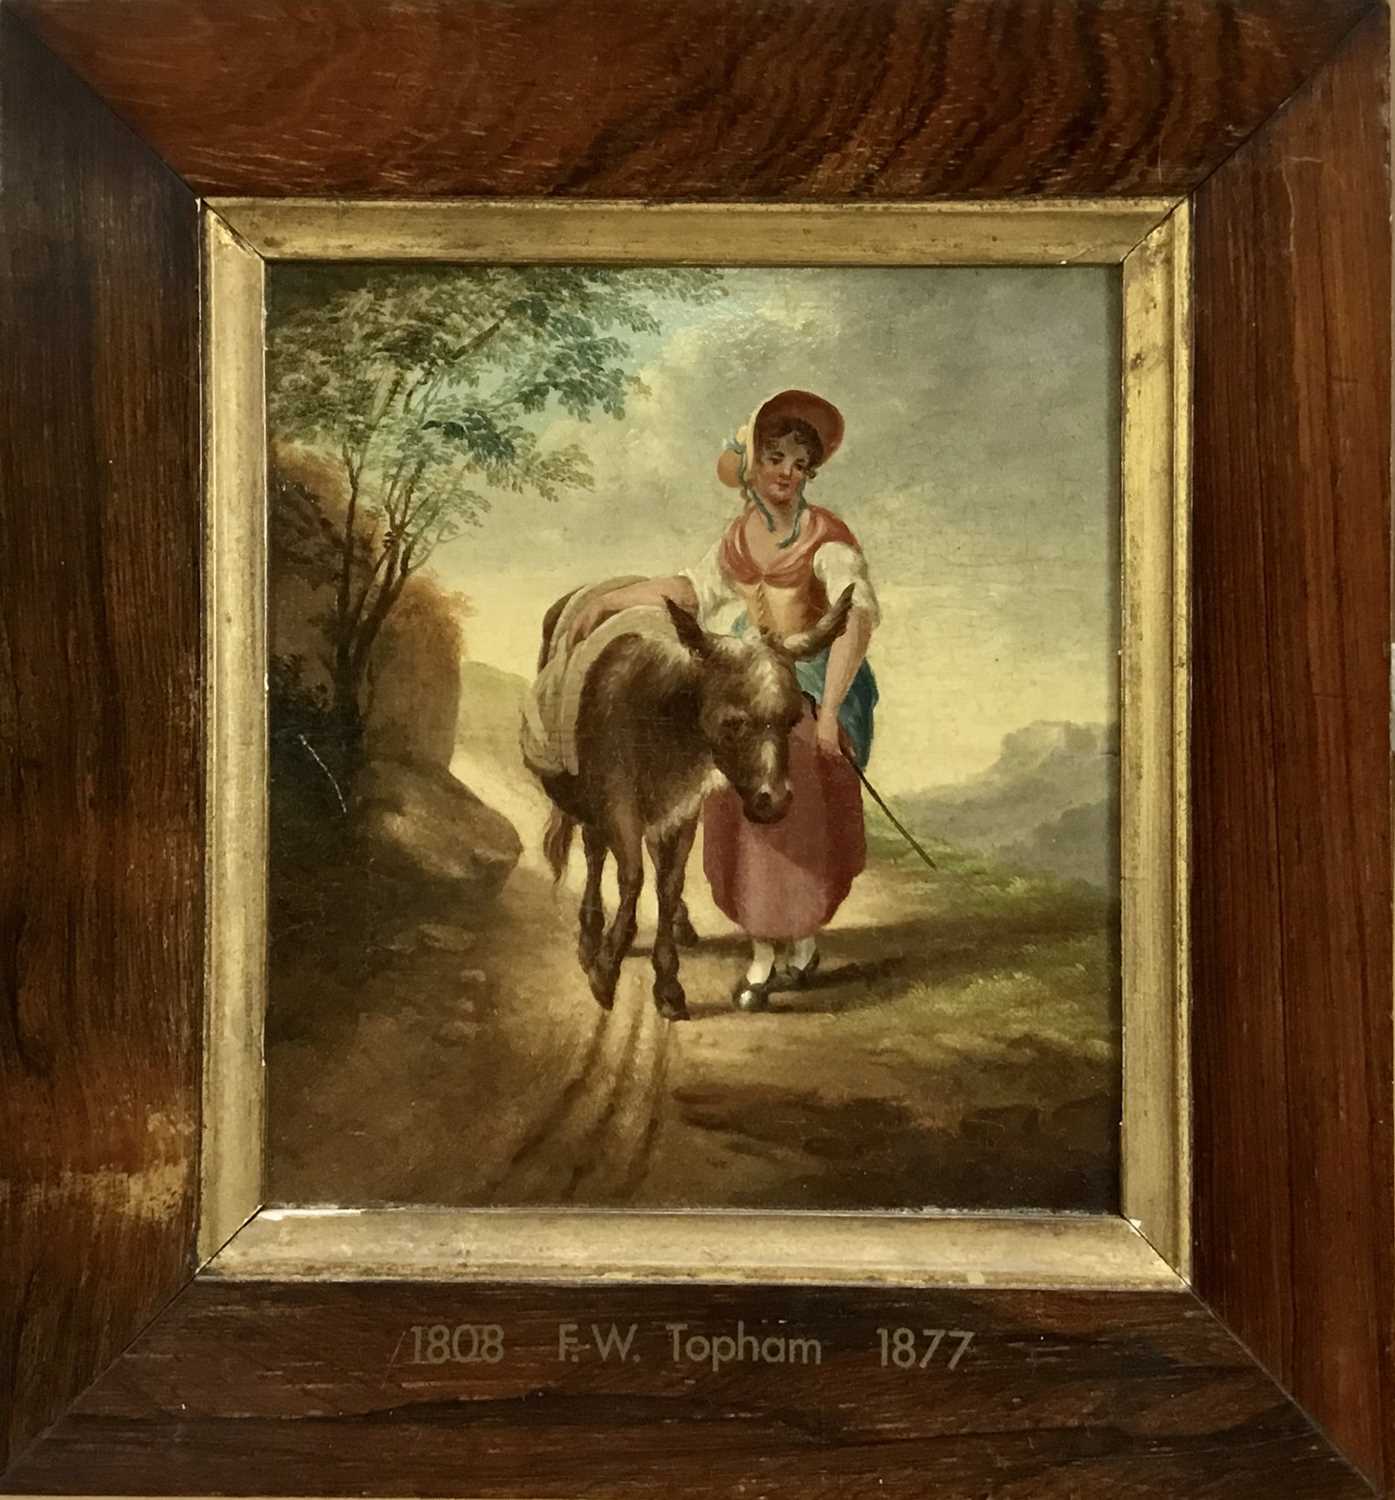 Lot 109 - Francis William Topham (1808-1877), oil on panel, A young peasant girl and her donkey on a hilly track, in rosewood frame, 16.5 x 15.4cm